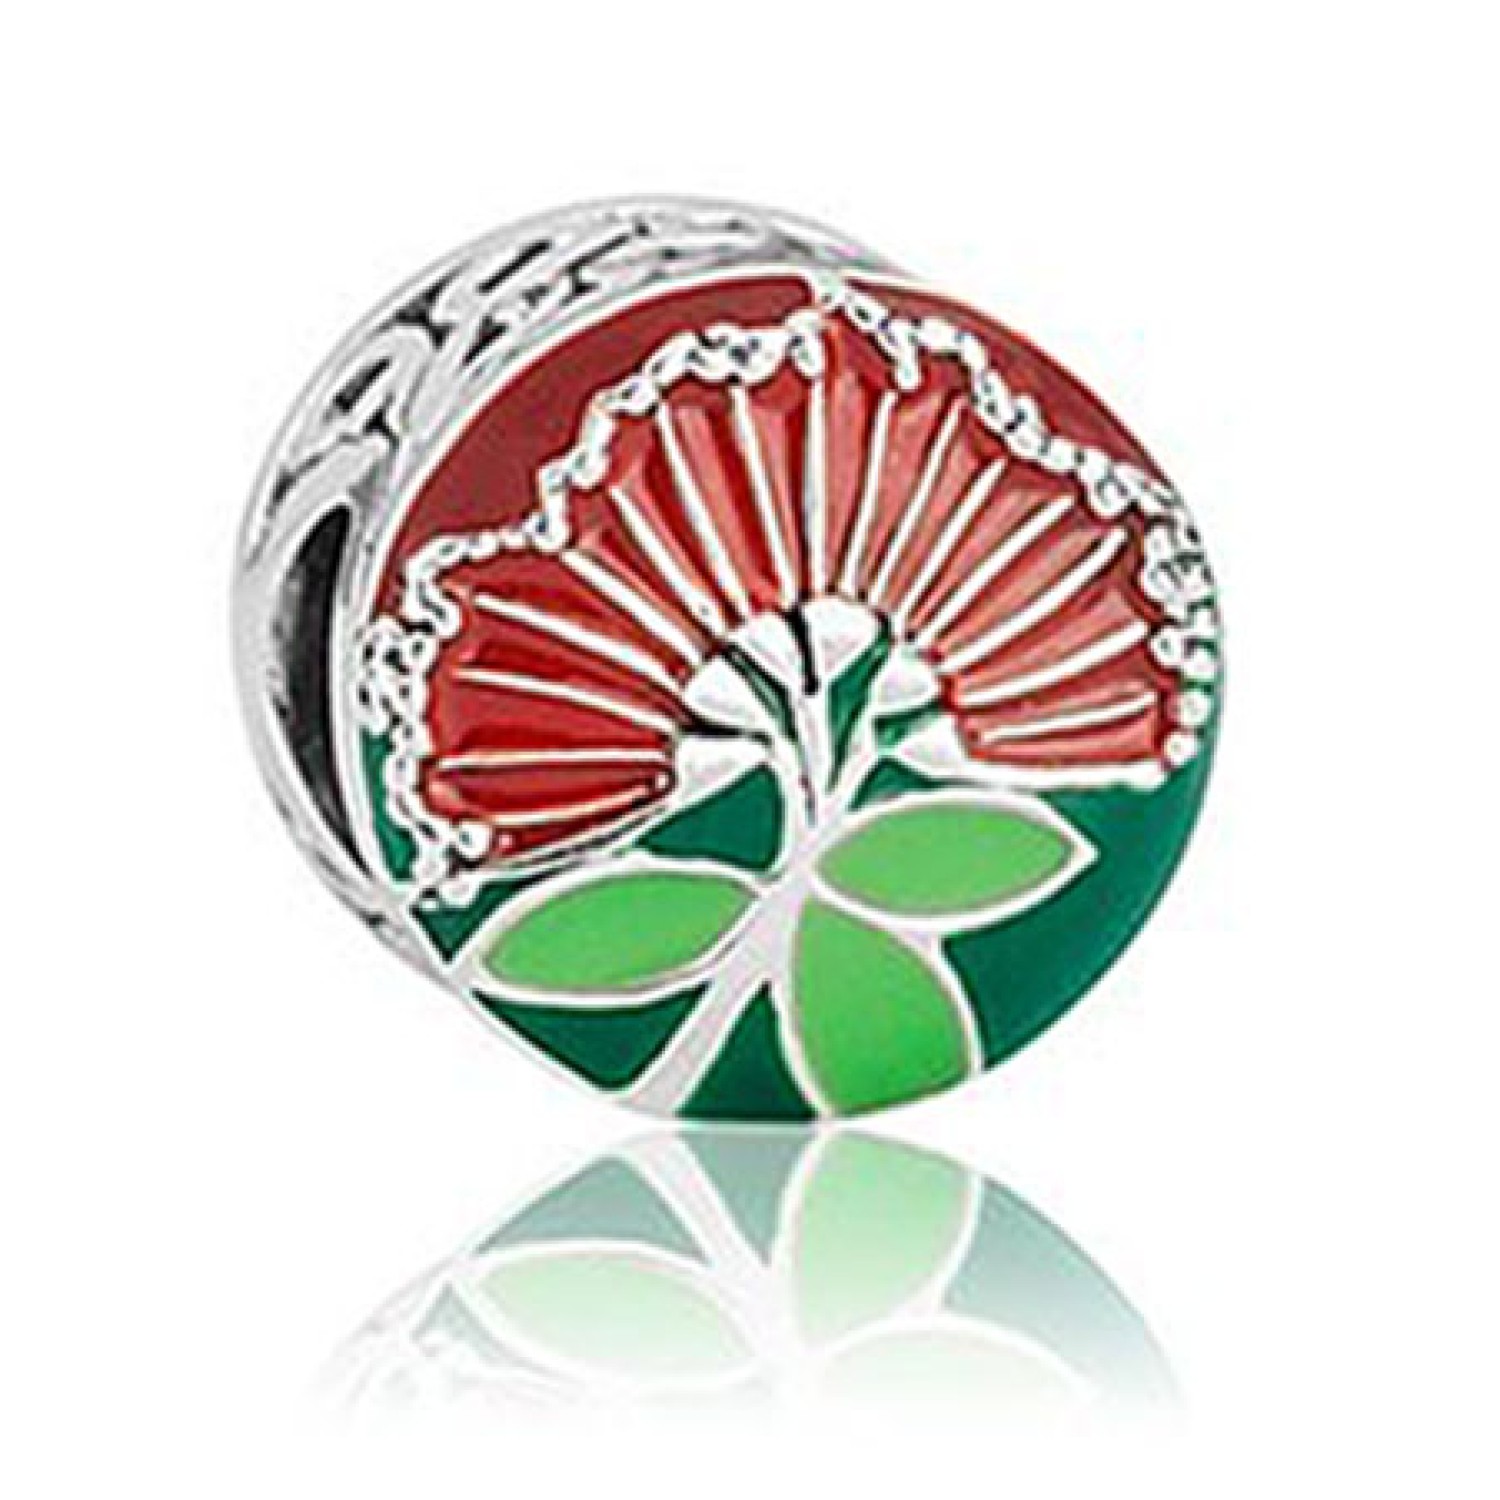 LKE046 Evolve Charm NZ Pohutukawa. This brilliant red enamel charm represents one of New Zealand’s most admired native trees, the beautiful Pohutukawa. The scarlet flowers of this magnificent tree can be spotted all around New Zealand at the beginning of 